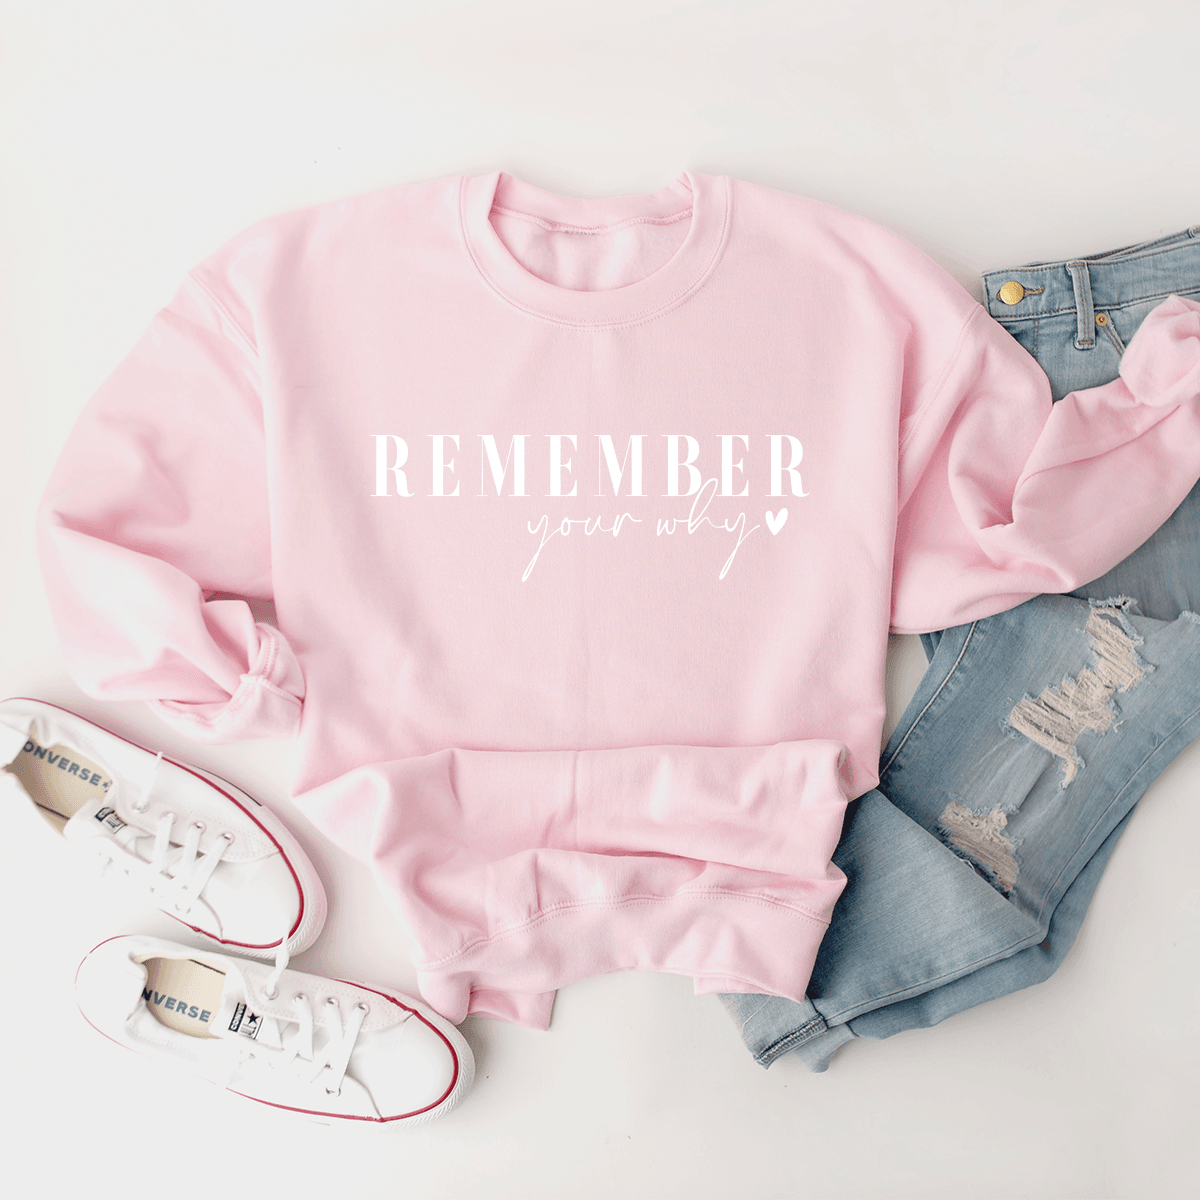 Remember Your Why - Sweatshirt